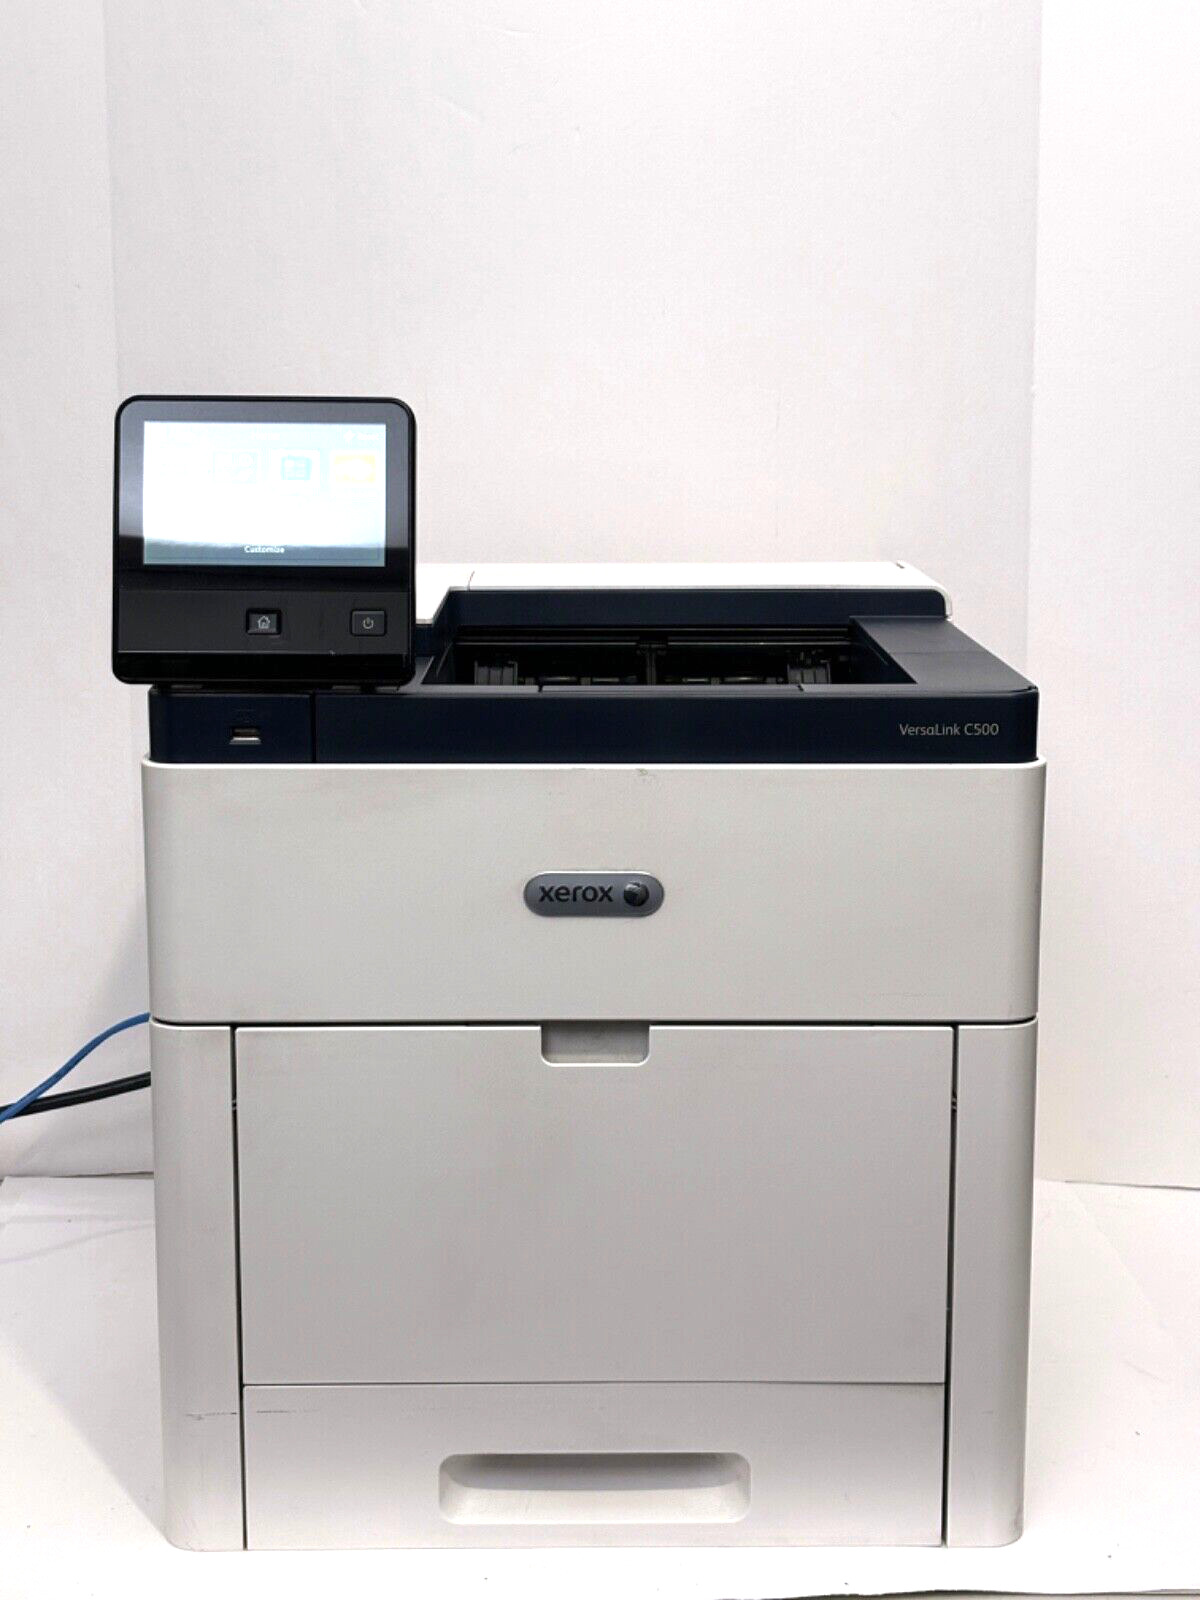 Xerox c500 color printer with color ink toners Nice printer very heavy duty